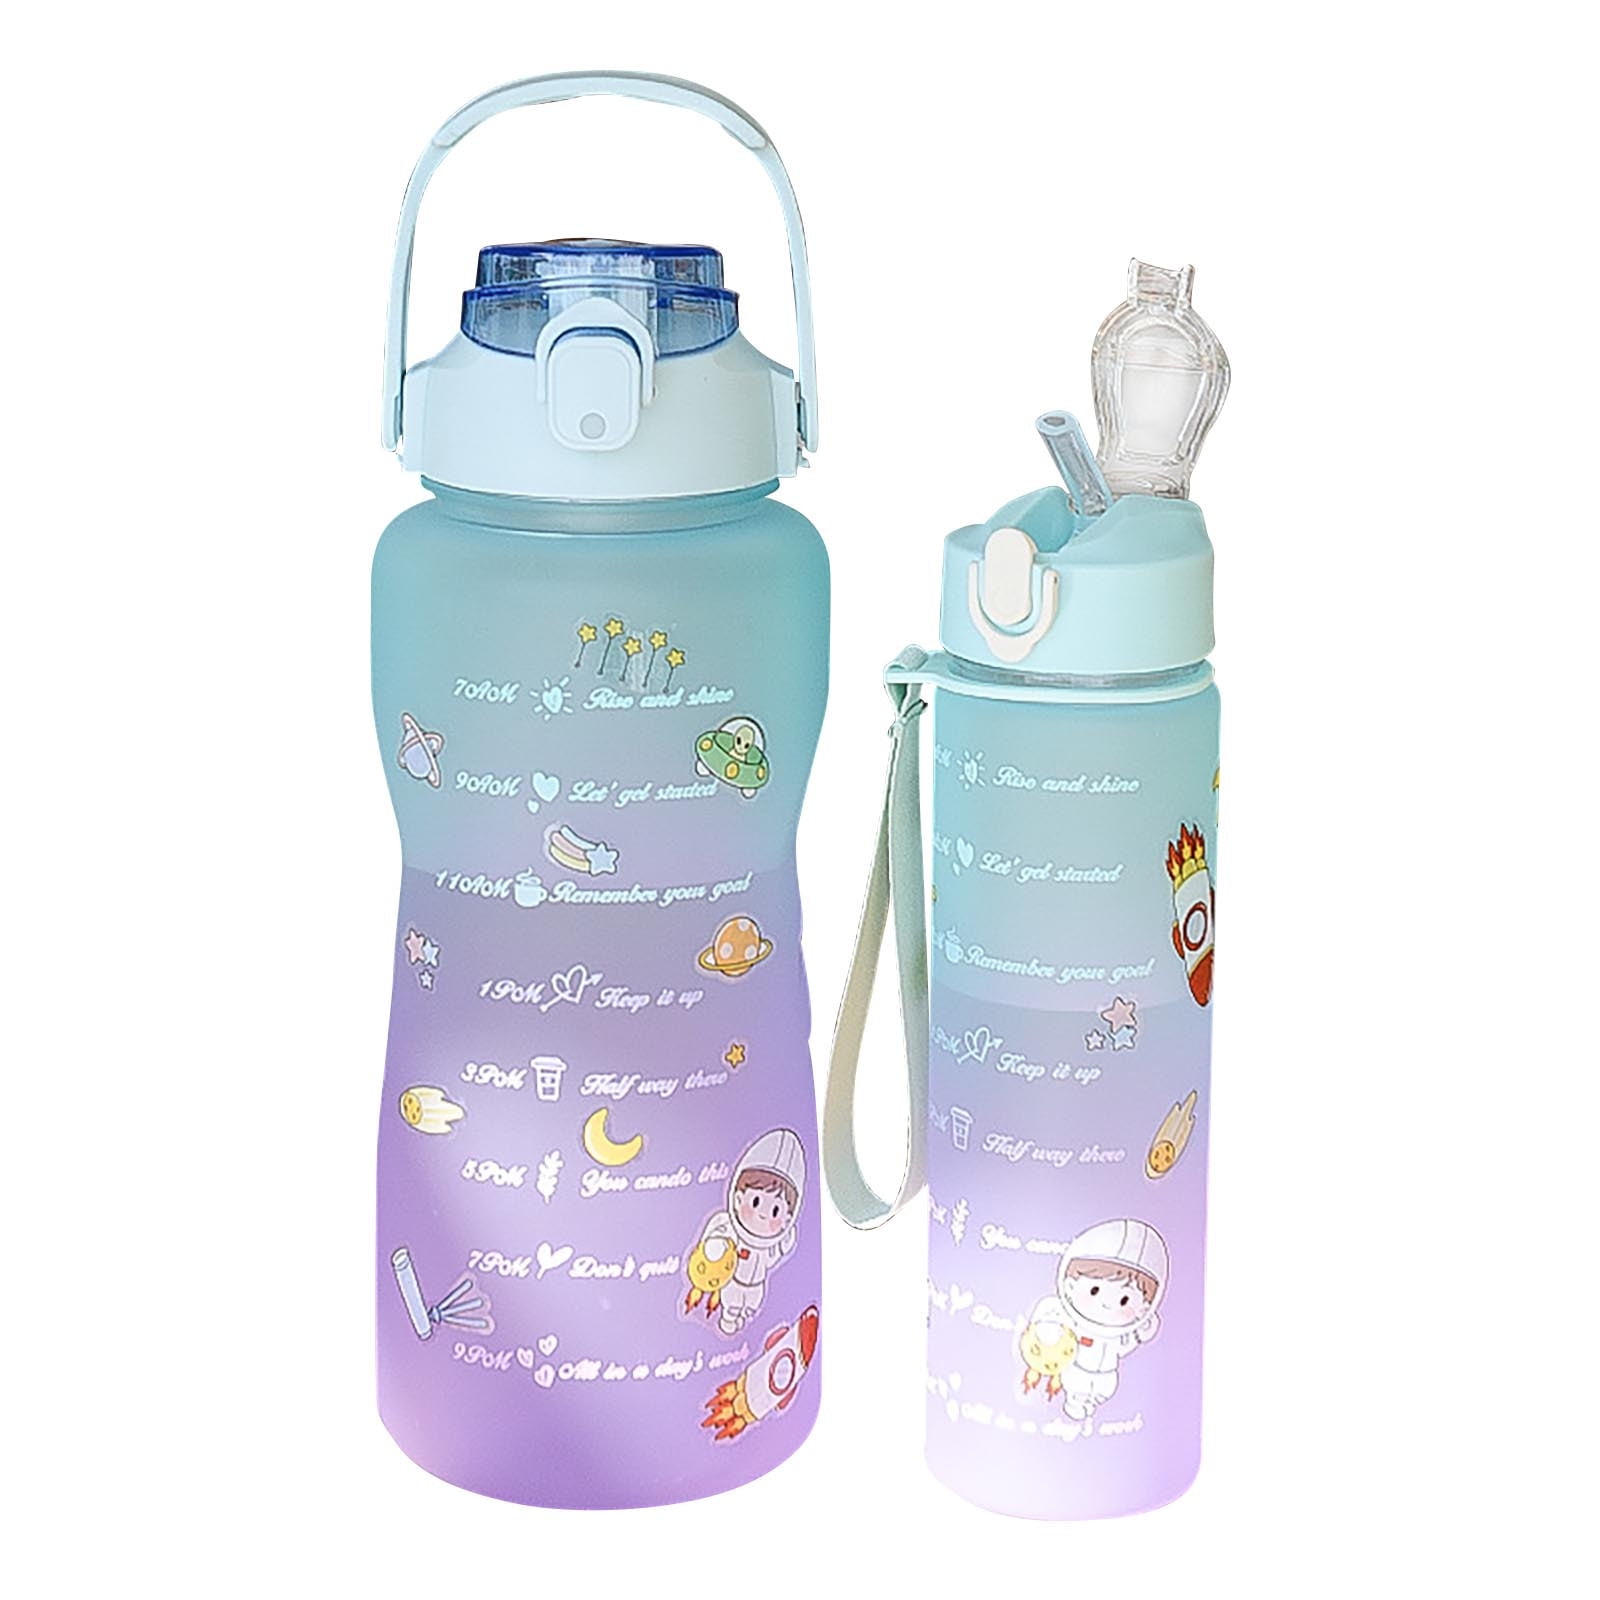 900ml/32oz Gradually Colored Time-marked Water Bottle, Daily Water